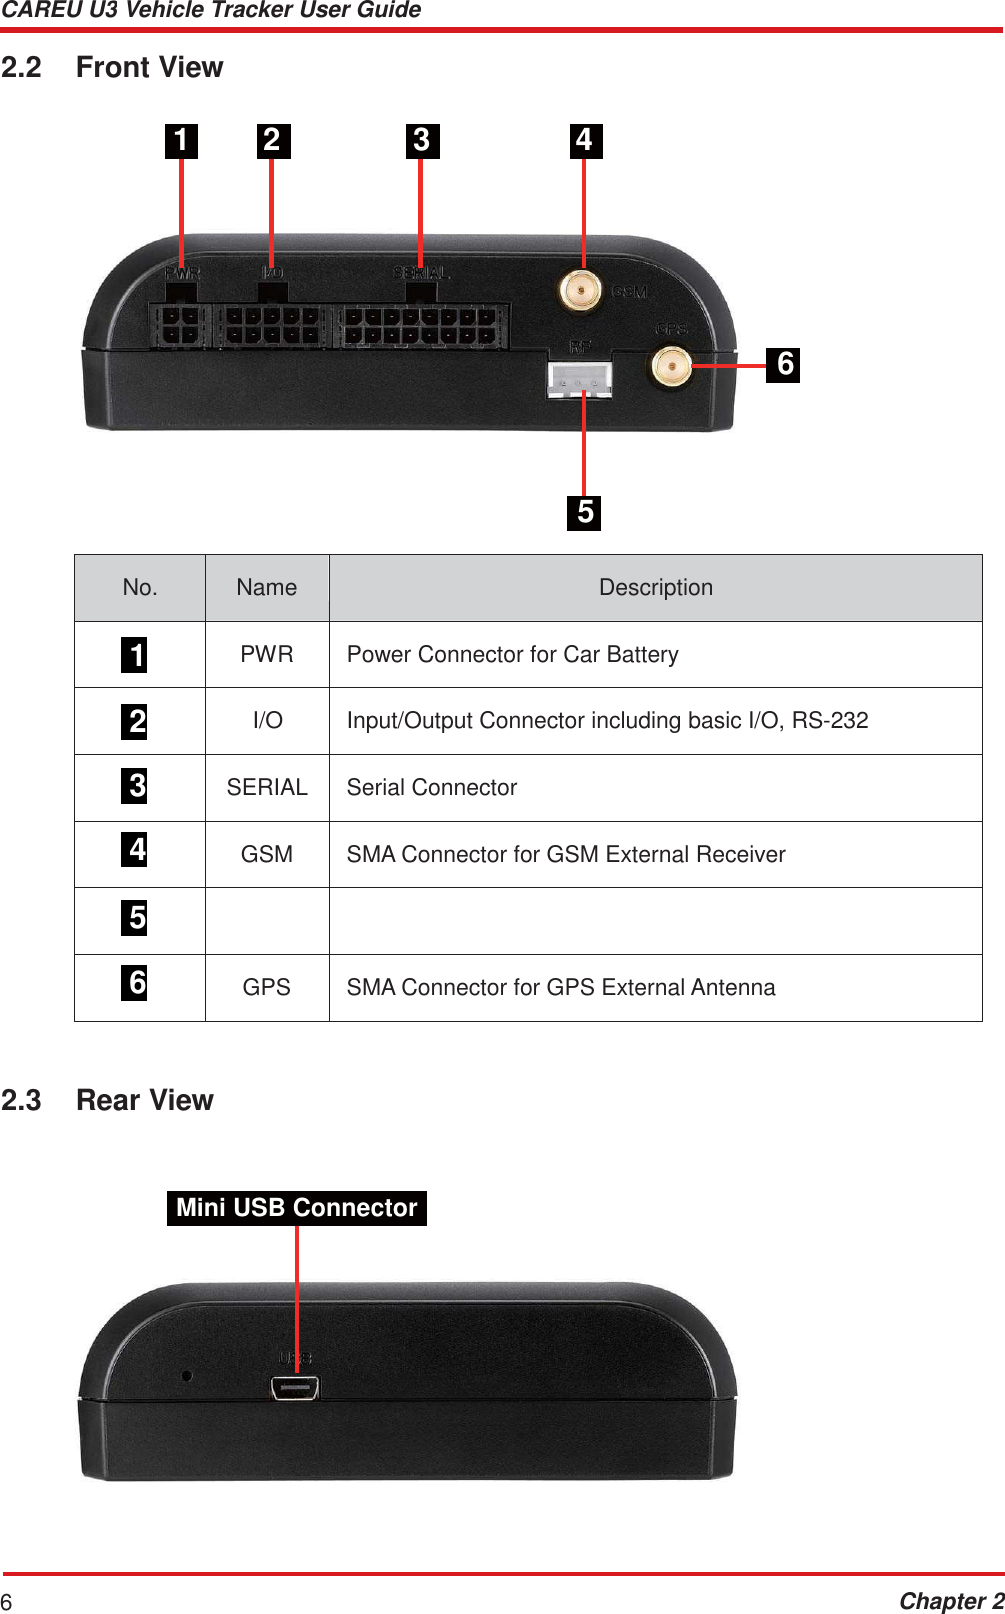 CAREU U3 Vehicle Tracker User Guide Chapter 2 6      2.2  Front View   1  2  3  4          6      5   No.  Name  Description   1  PWR  Power Connector for Car Battery   2  I/O  Input/Output Connector including basic I/O, RS-232   3  SERIAL  Serial Connector  4  GSM  SMA Connector for GSM External Receiver   5      6  GPS  SMA Connector for GPS External Antenna    2.3  Rear View     Mini USB Connector 